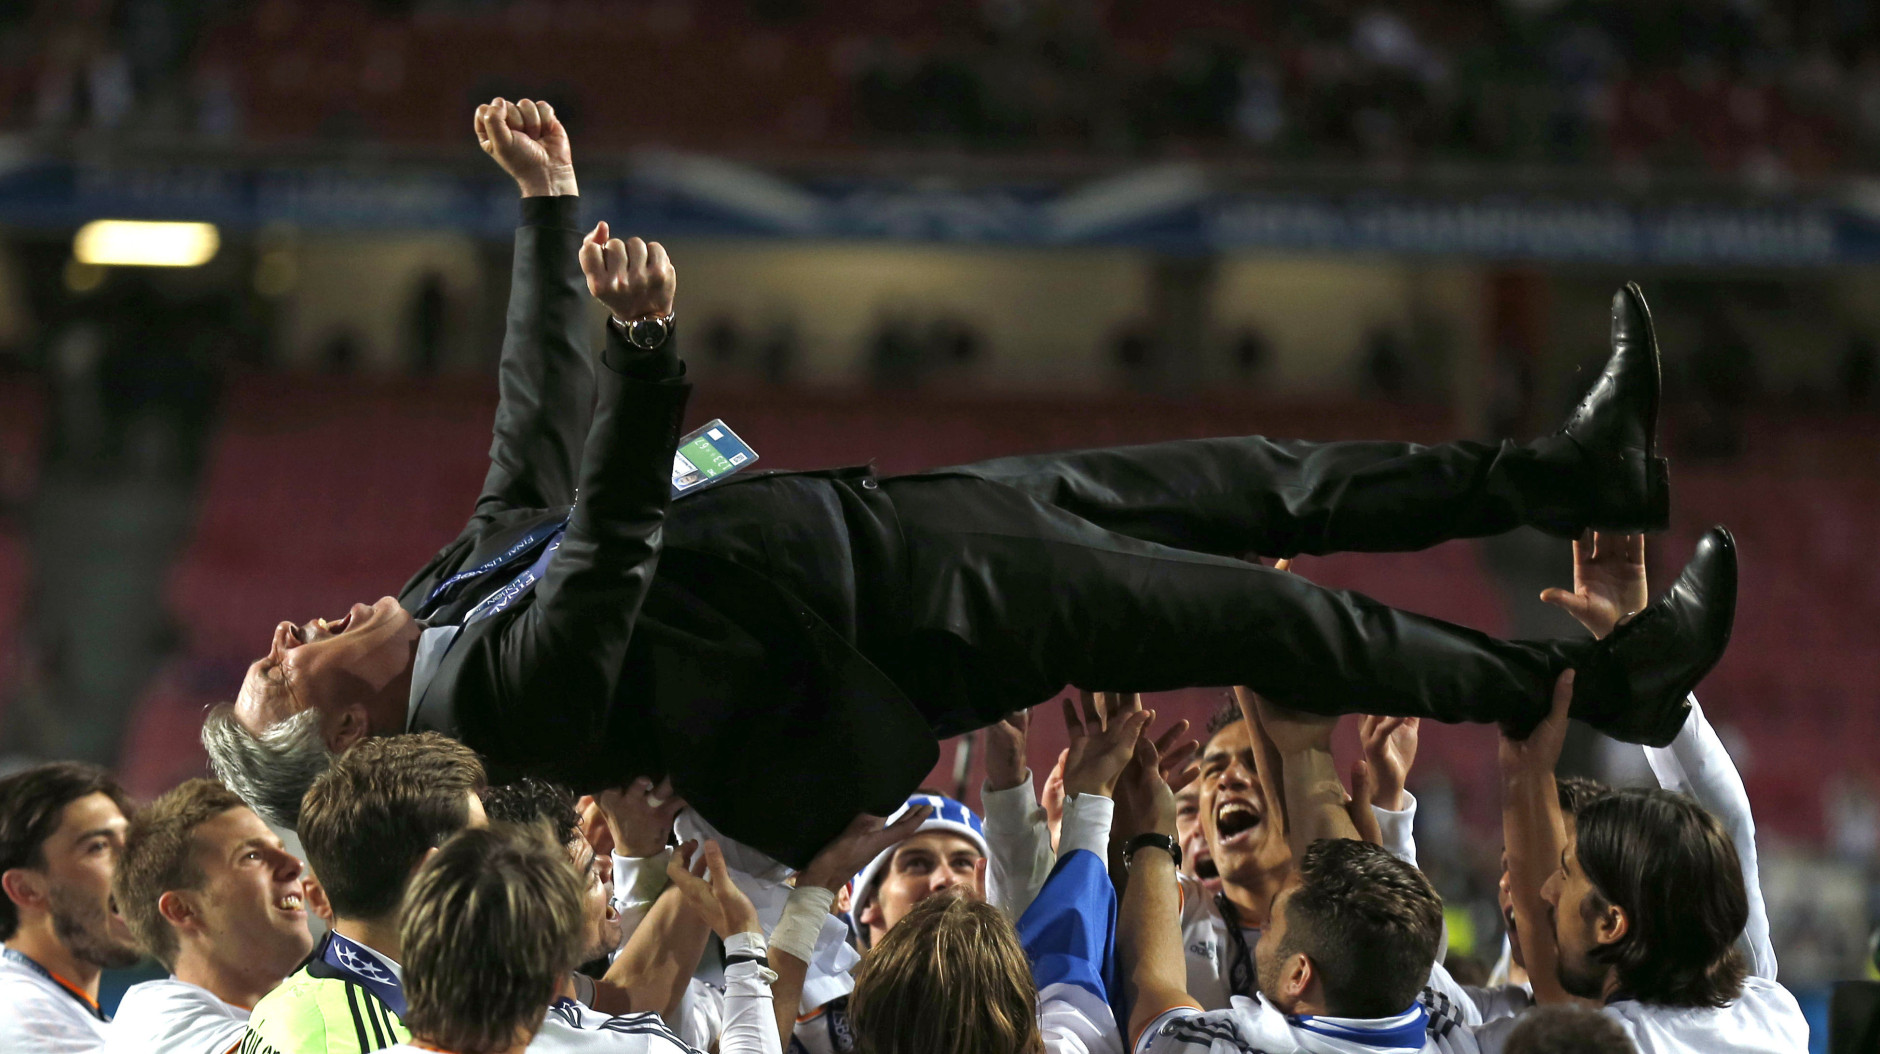 FOR USE AS DESIRED, YEAR END PHOTOS - FILE - Real's coach Carlo Ancelotti, is lifted in the air, after his team won the Champions League final soccer match between Atletico Madrid and Real Madrid in Lisbon, Portugal, Saturday, May 24, 2014.  (AP Photo/Andres Kudacki, File)